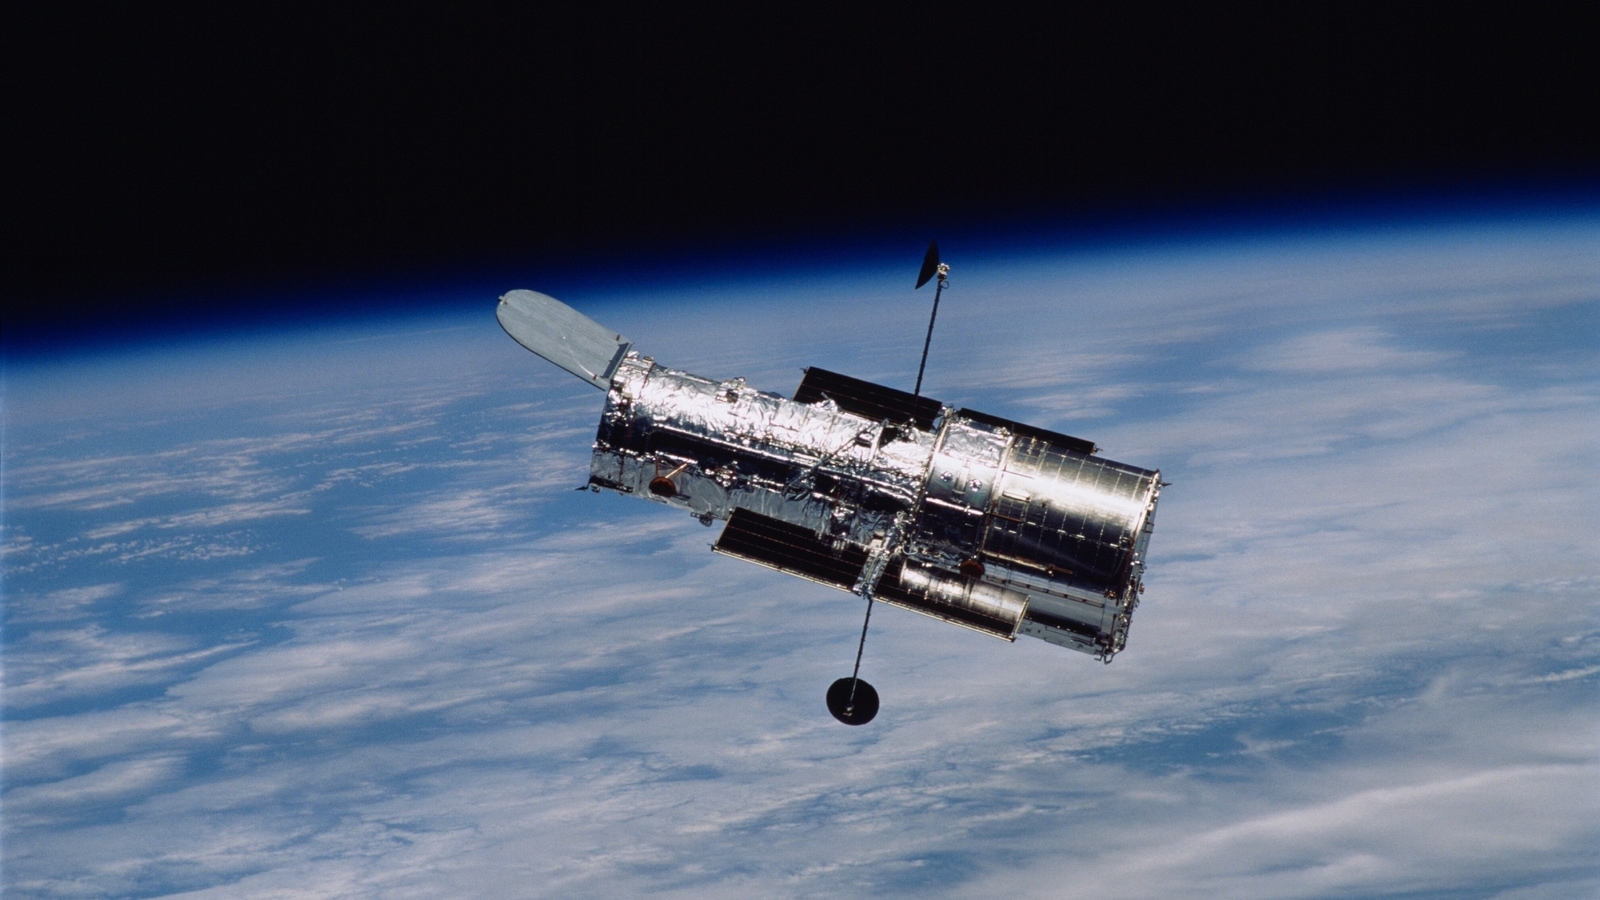 The Hubble Space Telescope, which was launched in 1990 and changed our vision of the universe, has been down for the past few days and operations are 